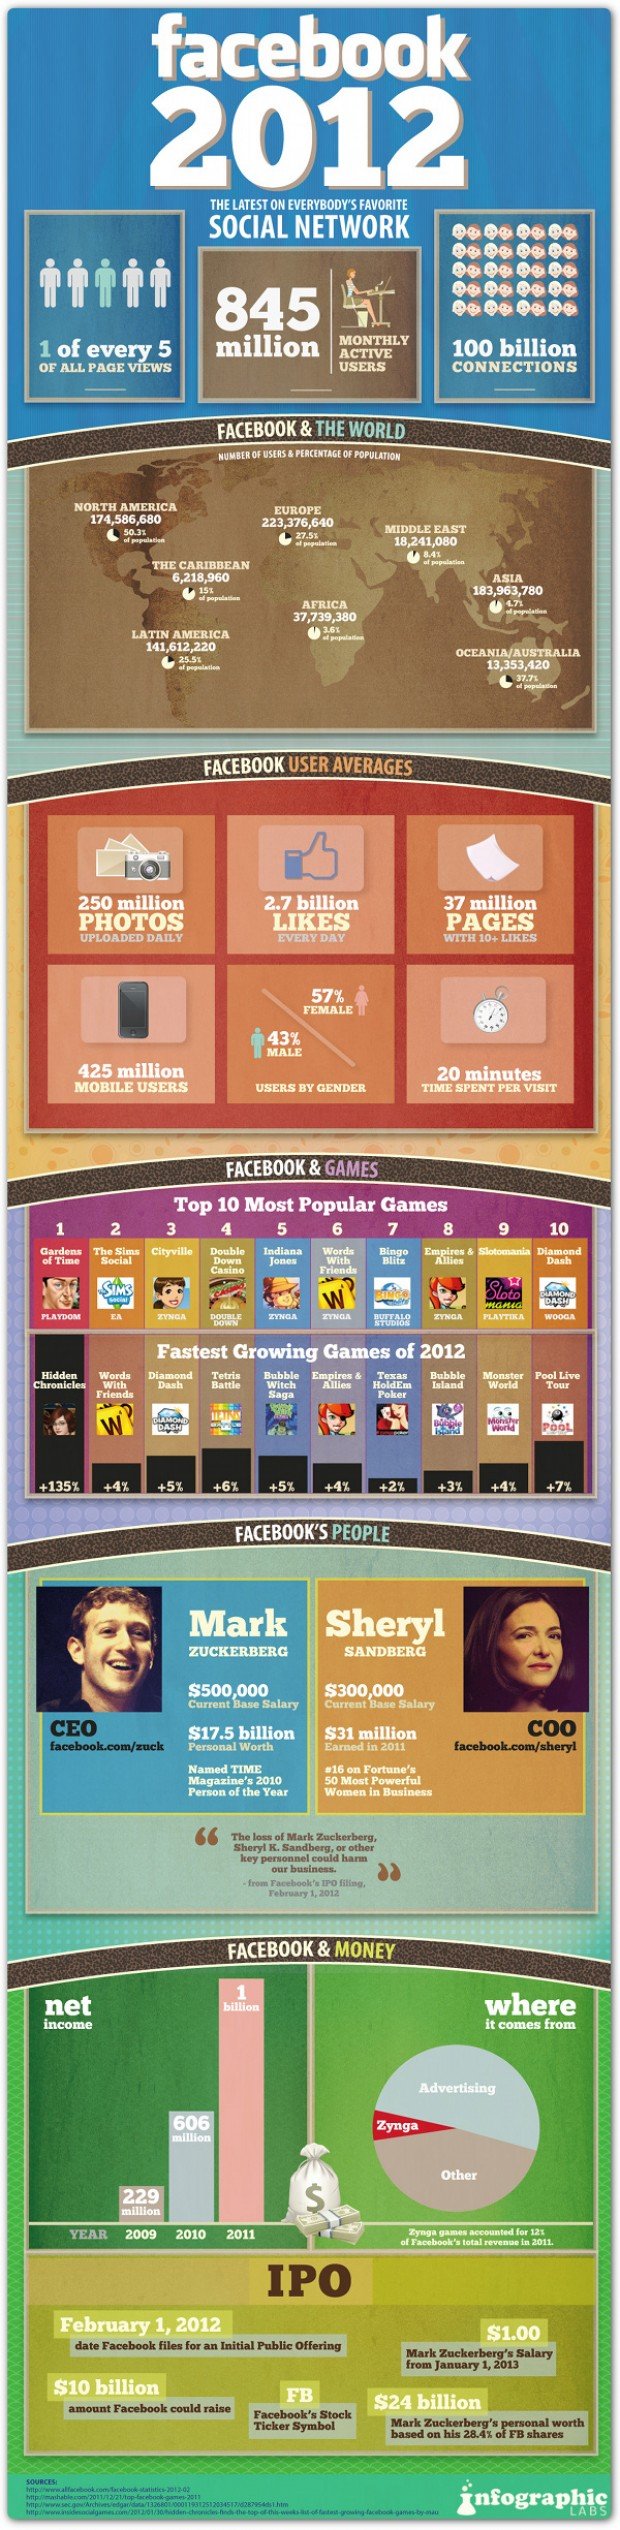 Facebooks’ 2012 Stats [Infographic]